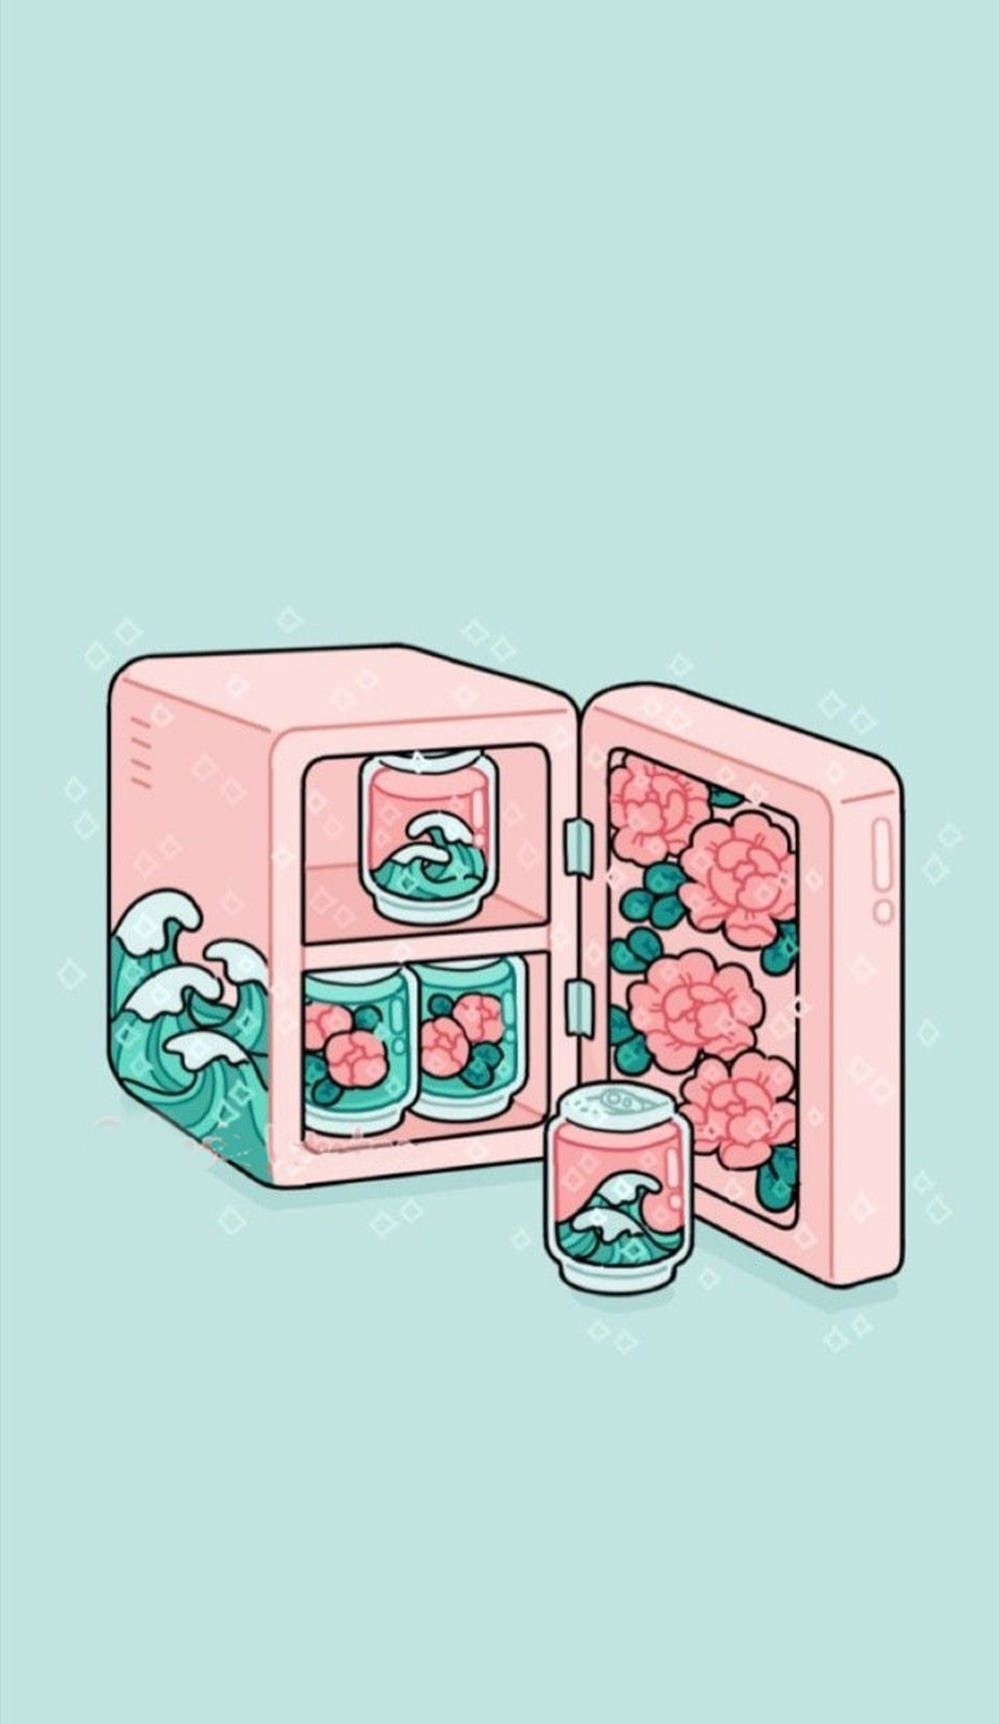 A pink mini fridge with a wave and flower design on it - Kawaii